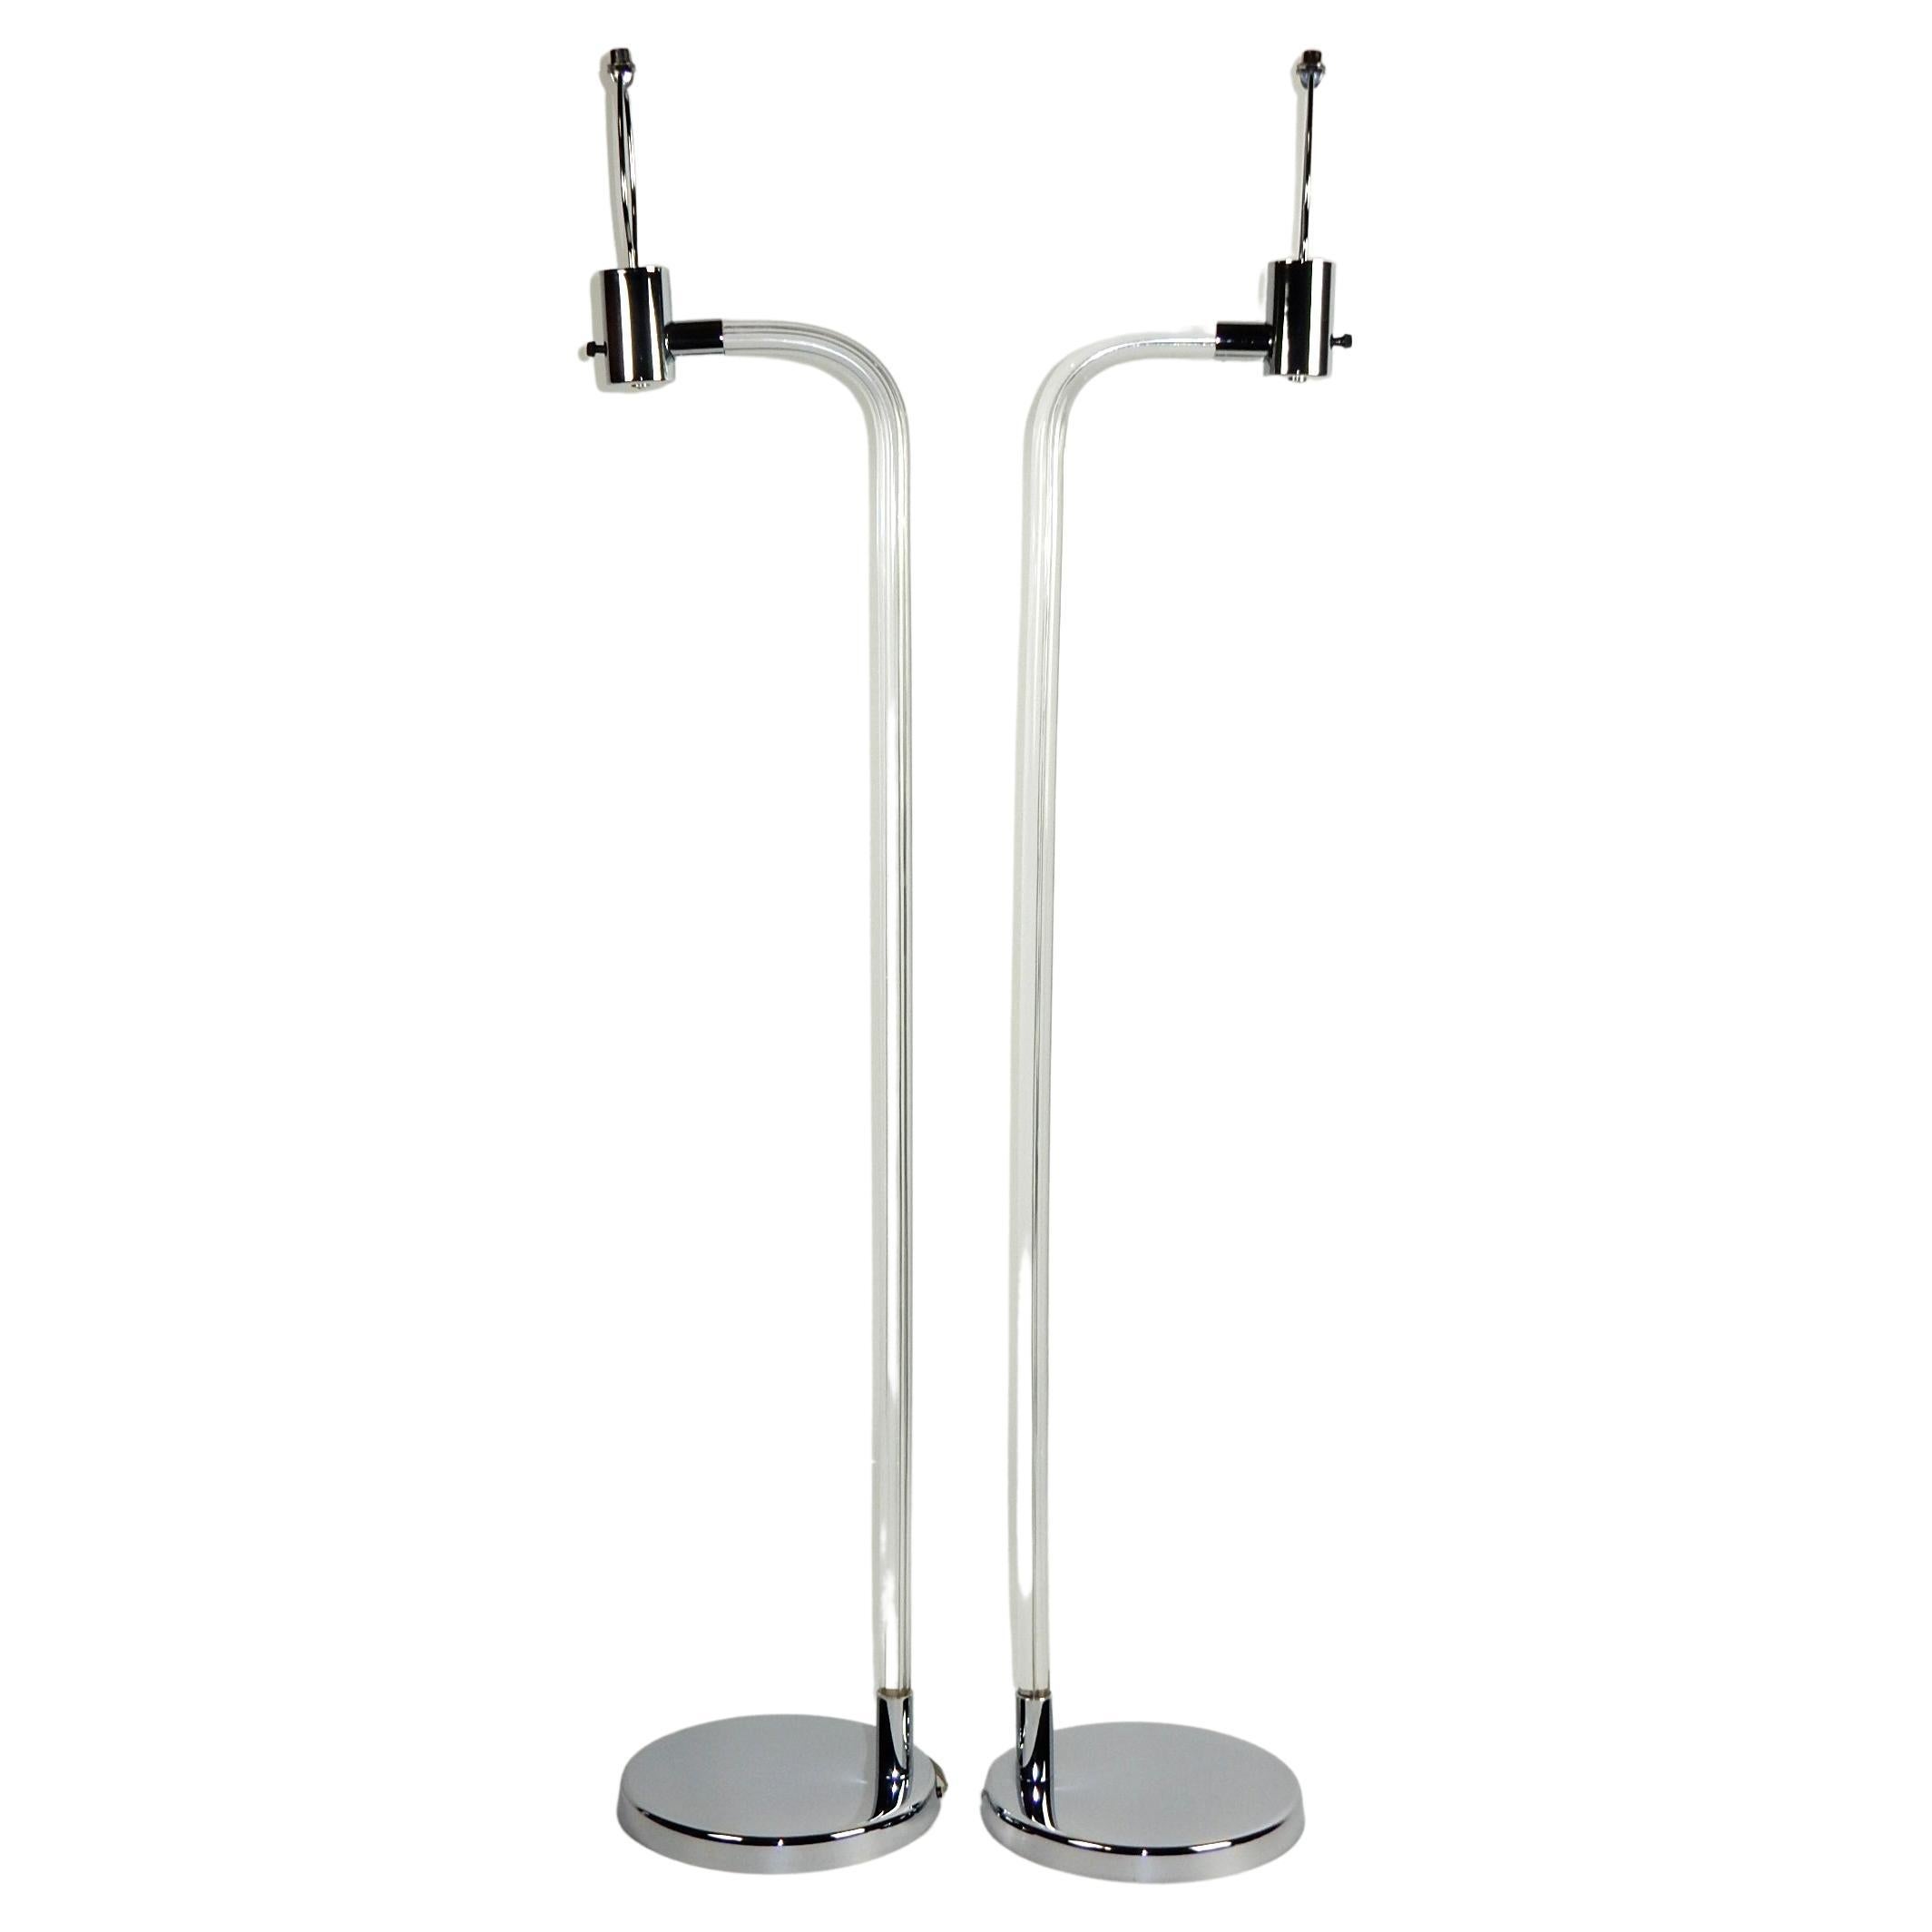 Here is an exceptionally well cared for pair of Lucite and chrome floor reading lamps.
designed by Peter Hamburger for Knoll, 1970's.
Large gleaming chrome steel disc base supporting a 1 inch thick Lucite rod with 